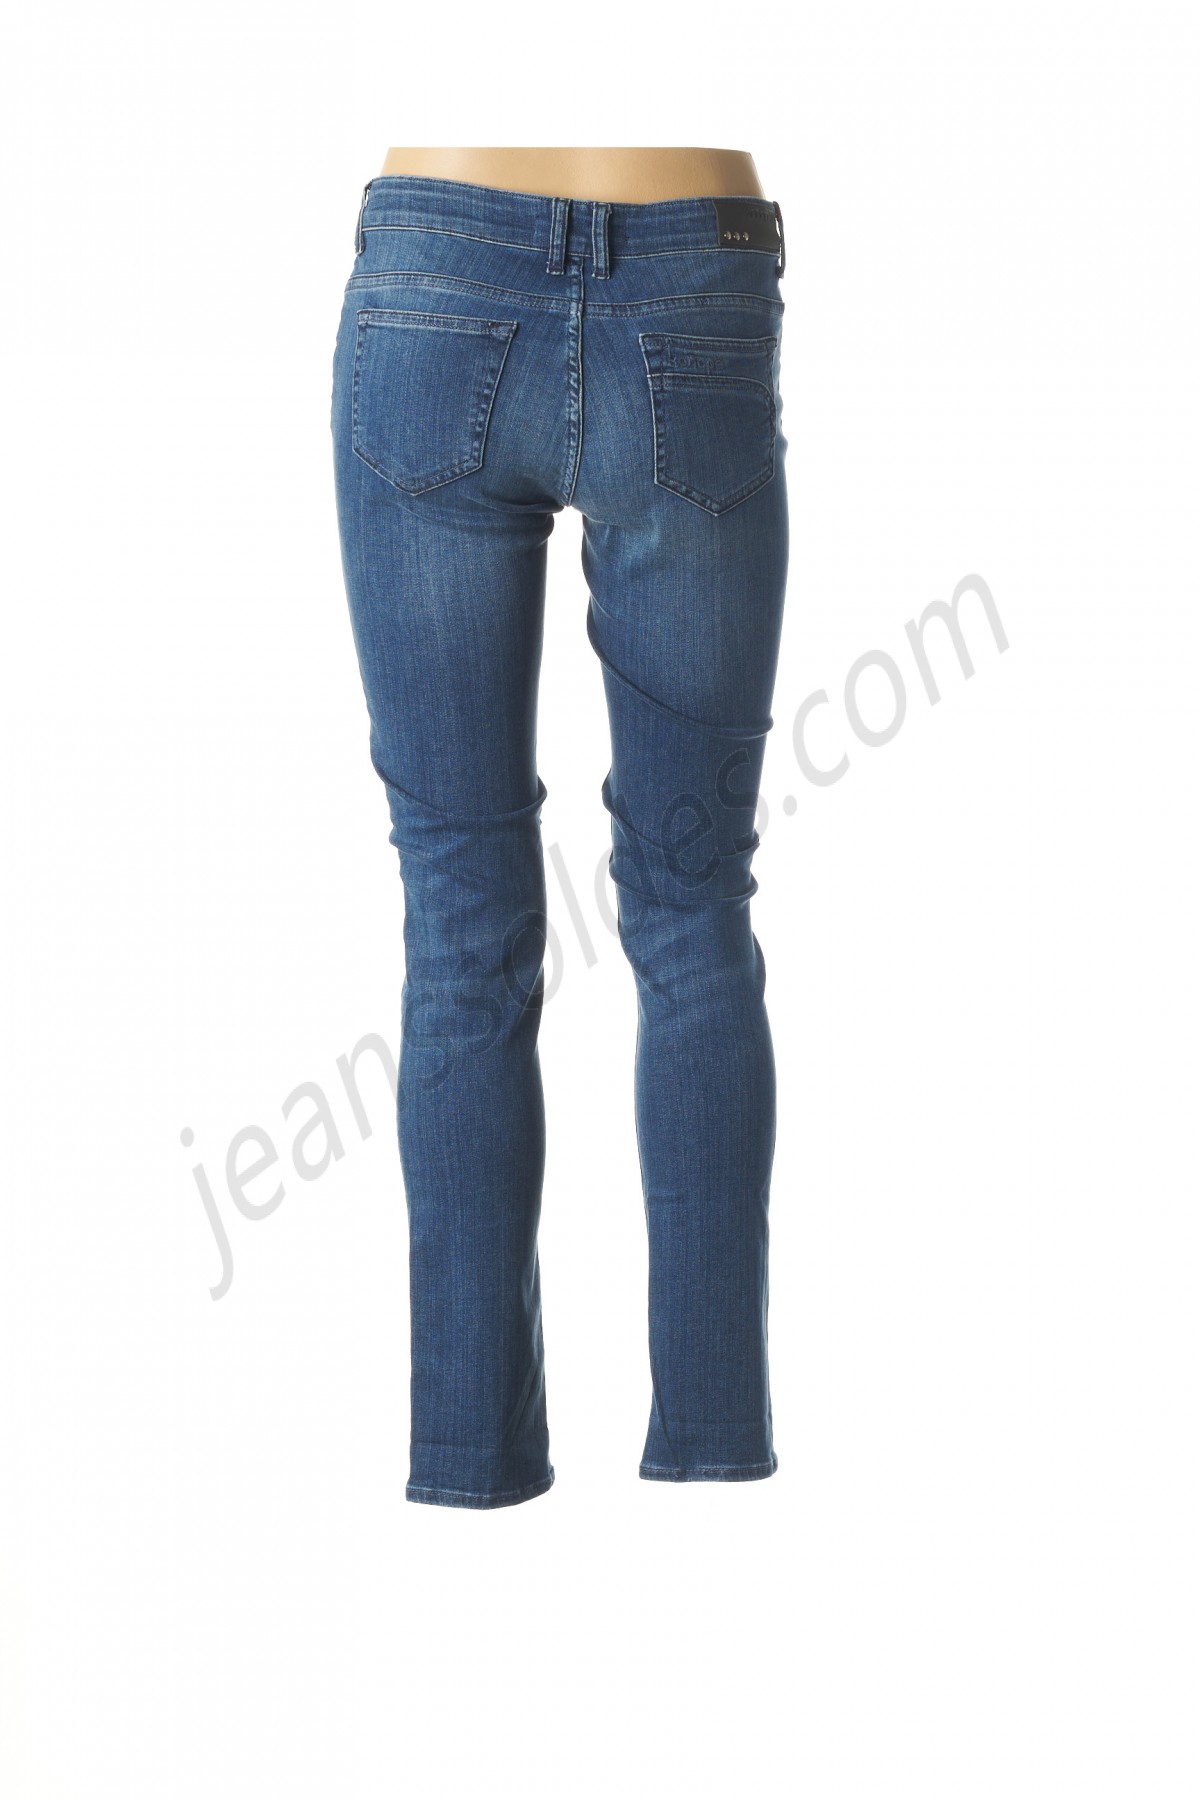 kanope-Jeans coupe slim prix d’amis - -1